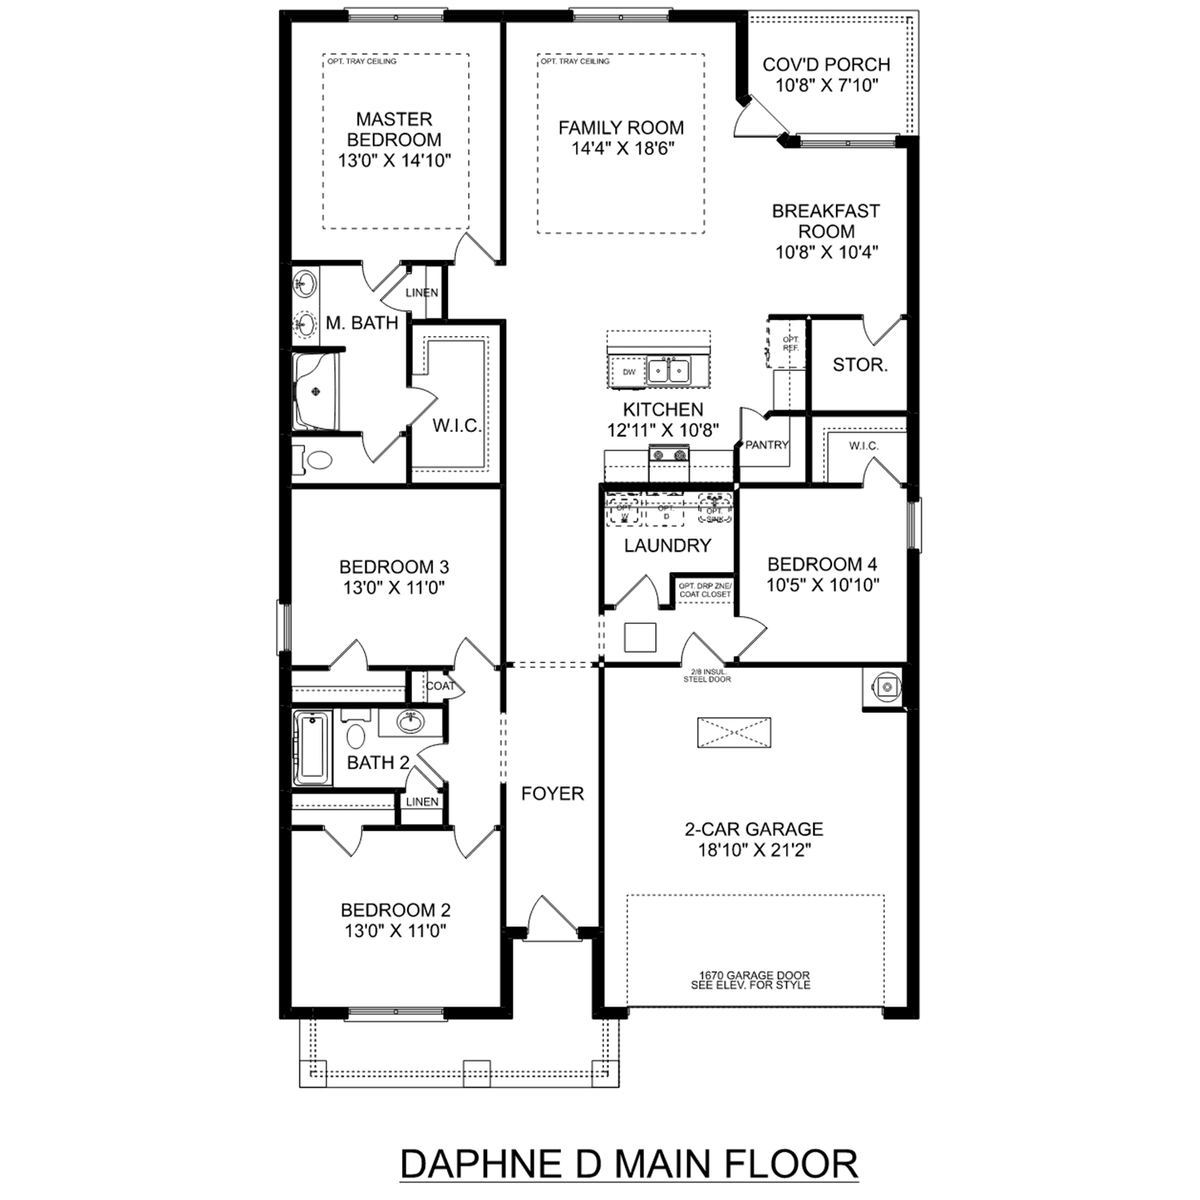 1 - The Daphne D floor plan layout for 111 Bella May Lane in Davidson Homes' Heritage Lakes community.